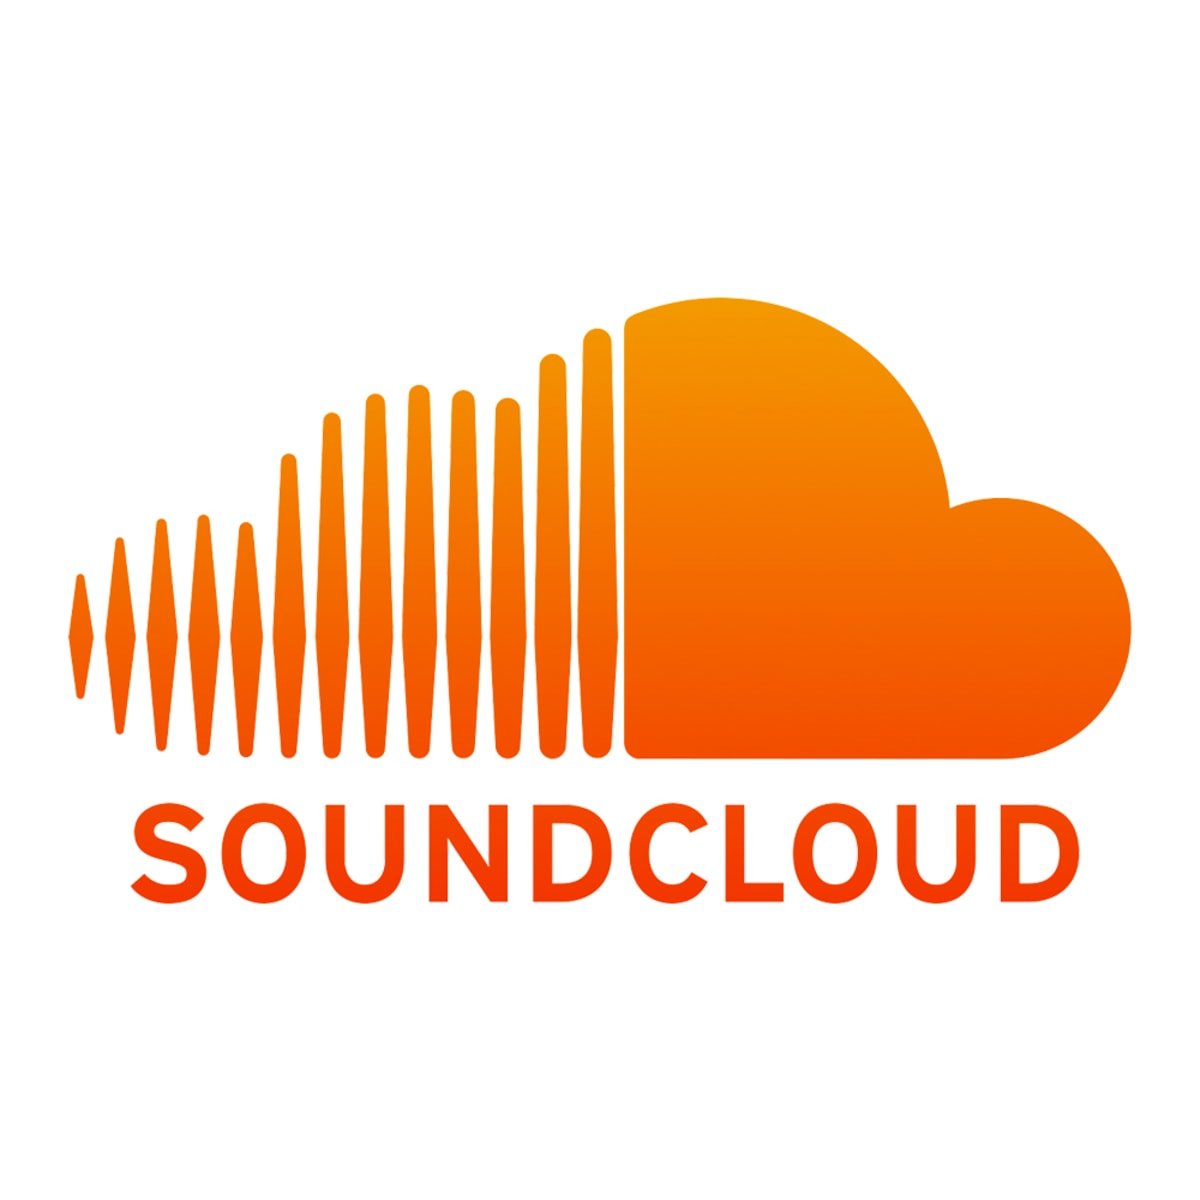 Soundcloud Embed Example